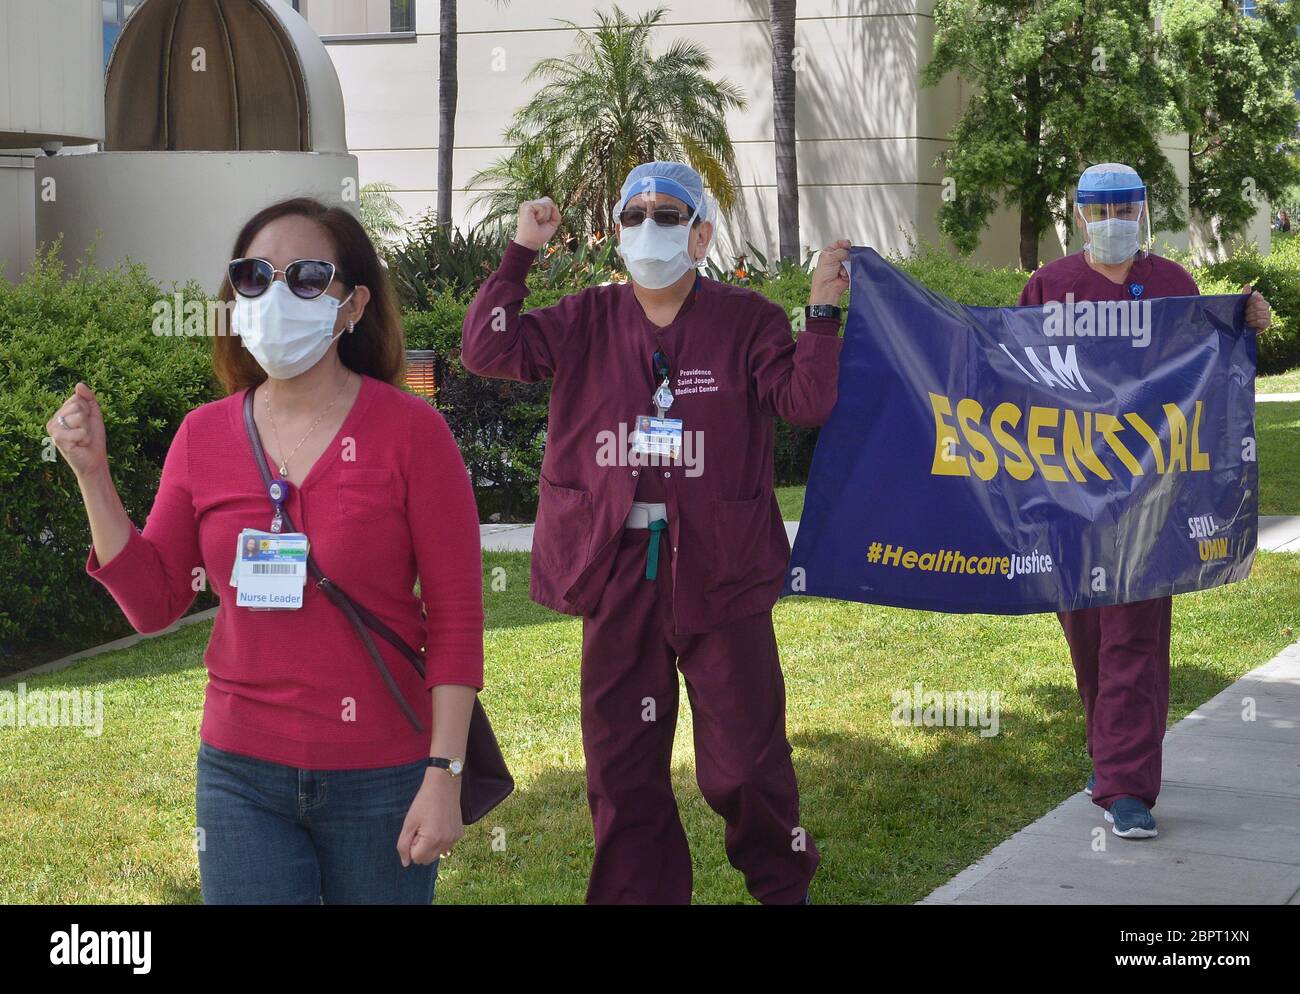 Burbank, United States. 19th May, 2020. A small group of employees picket outside the Providence St. Joseph Medical Center in Burbank, California on Tuesday, May 19, 2020. The picketers claim management is putting their health and safety at risk.because of lax protocols around the treatment of COVID-19 patients, a lack of personal protective equipment and short-staffing. Photo by Jim Ruymen/UPI Credit: UPI/Alamy Live News Stock Photo